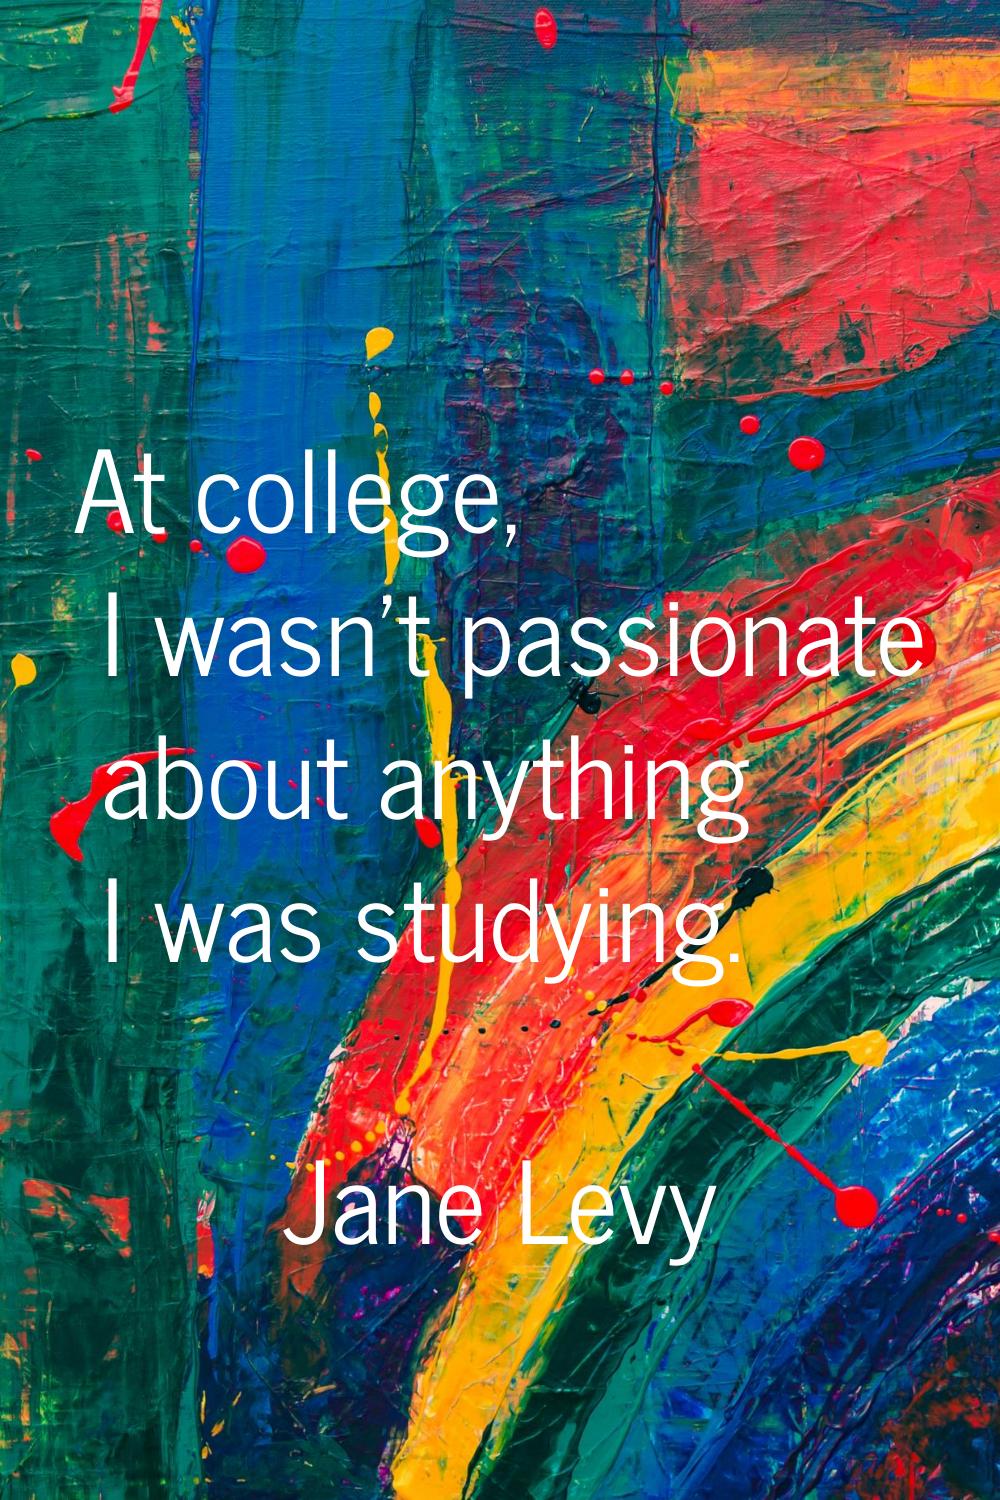 At college, I wasn't passionate about anything I was studying.